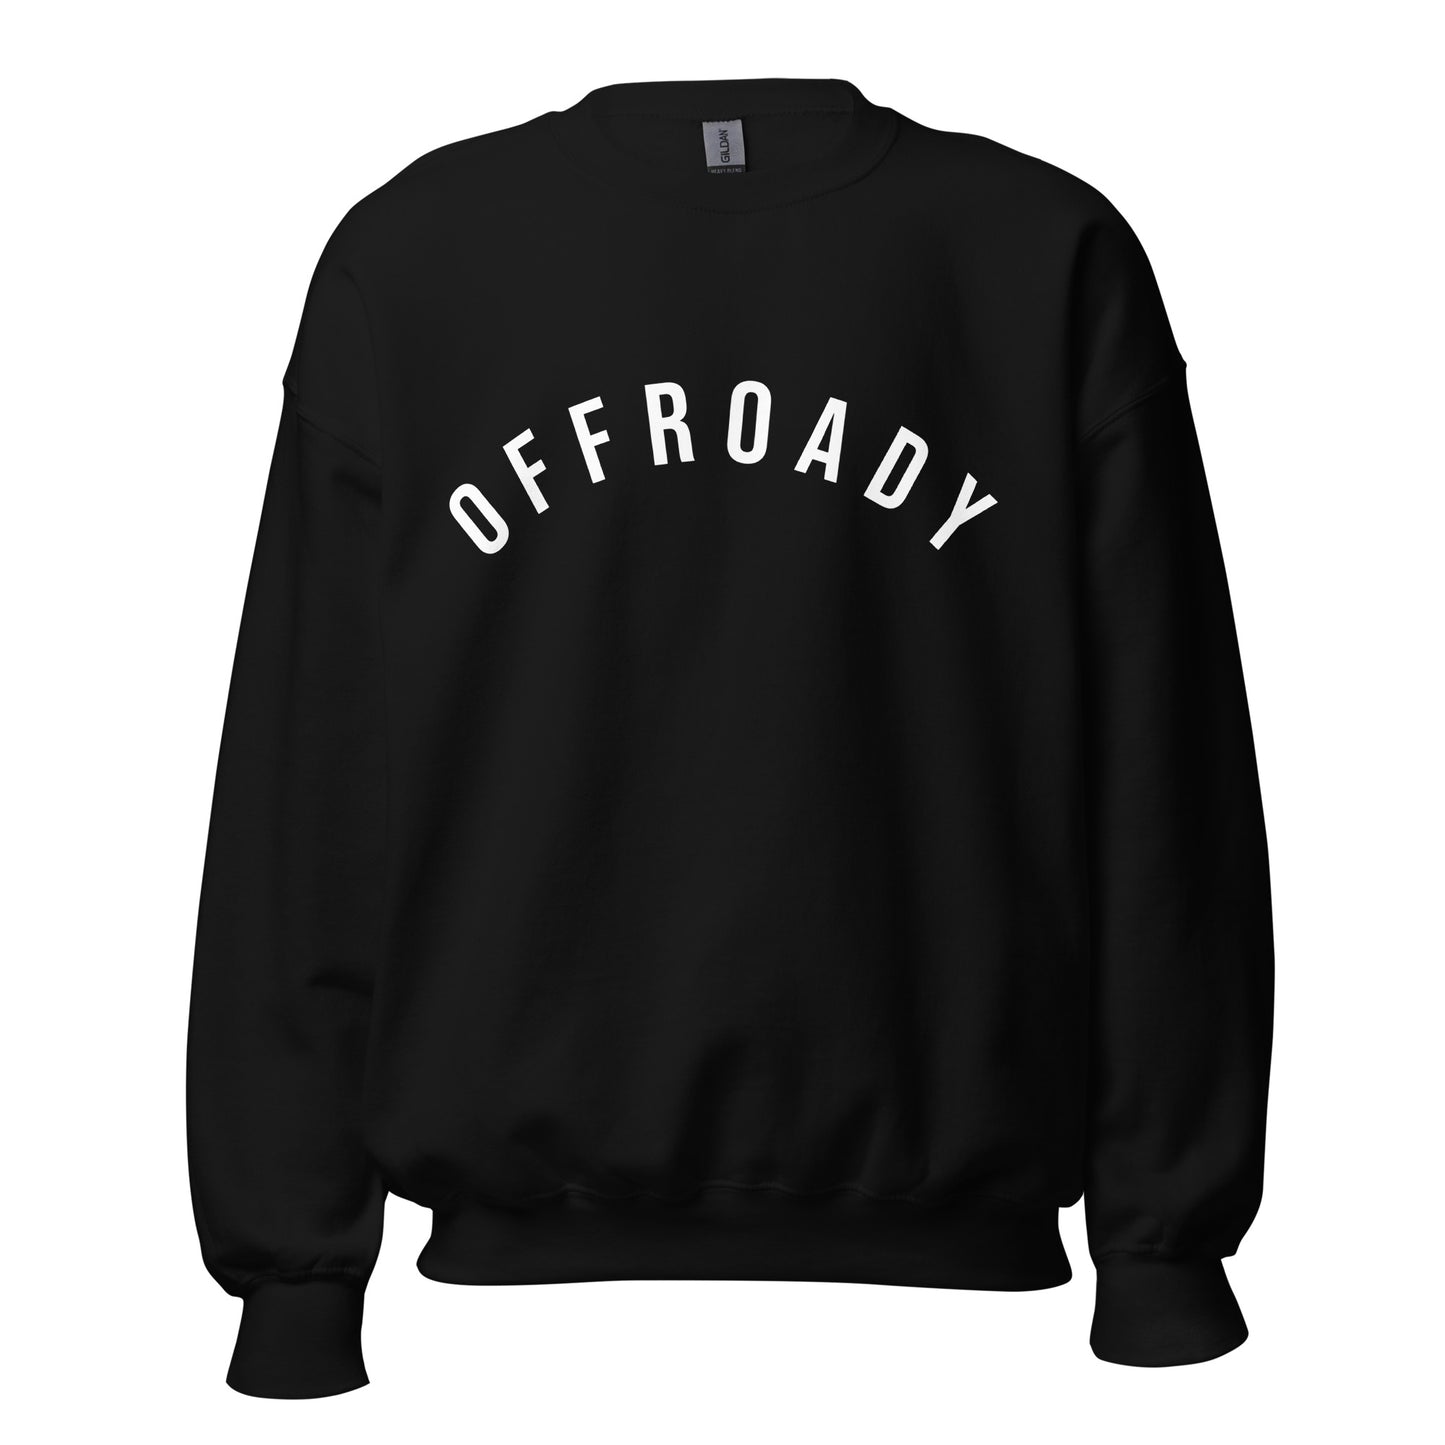 black sweatshirt with the word offroady in a white, capitalised font across the chest